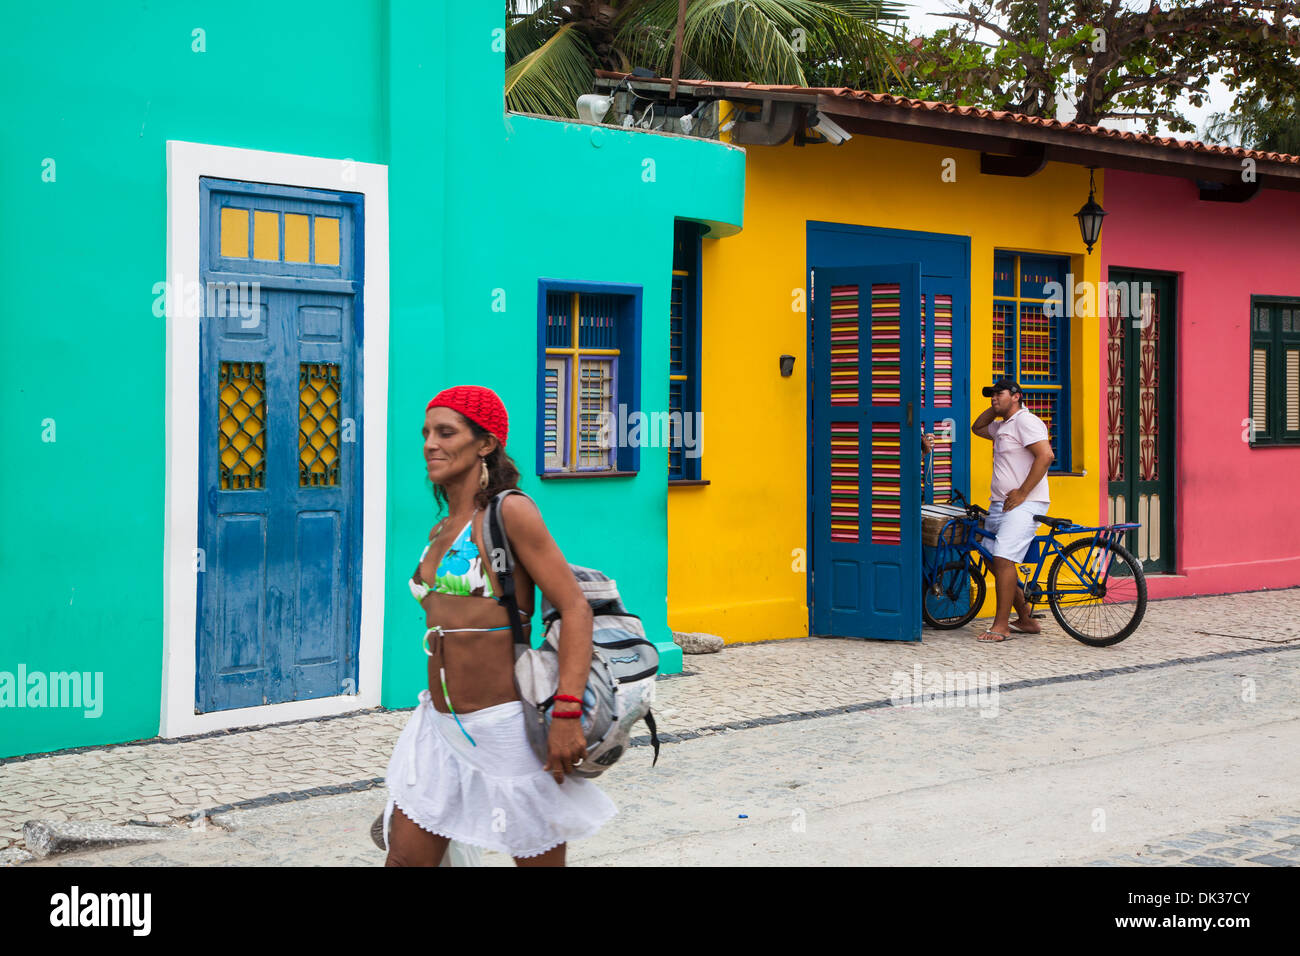 Colorful houses in Iracema, Fortaleza, Brazil. Stock Photo